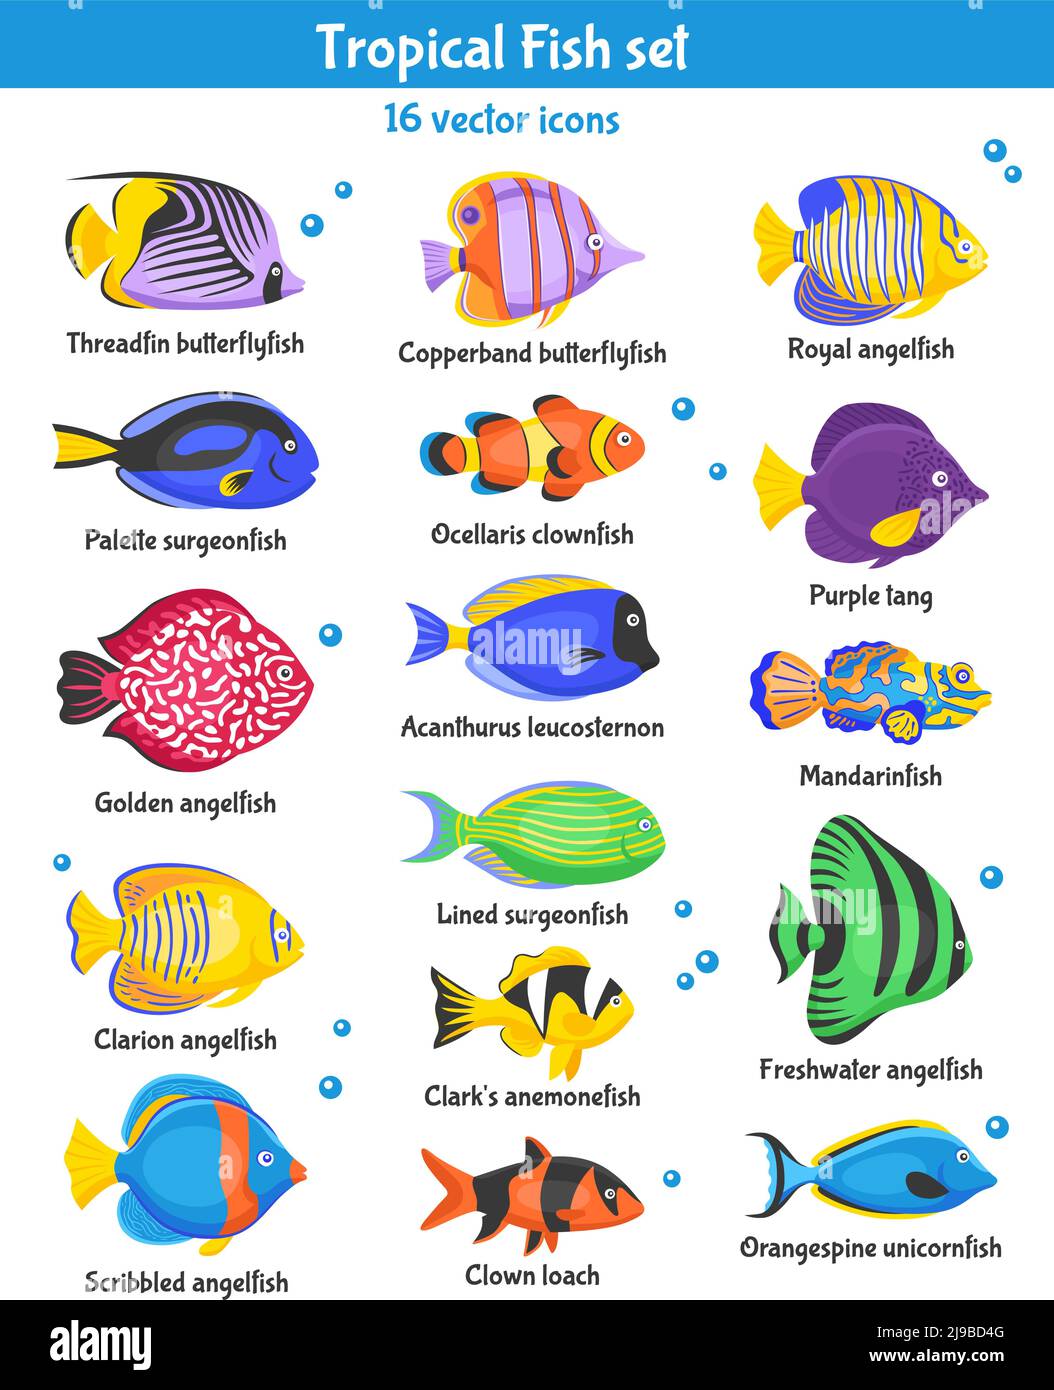 Exotic tropical fish icons set with fish species flat isolated vector illustration Stock Vector